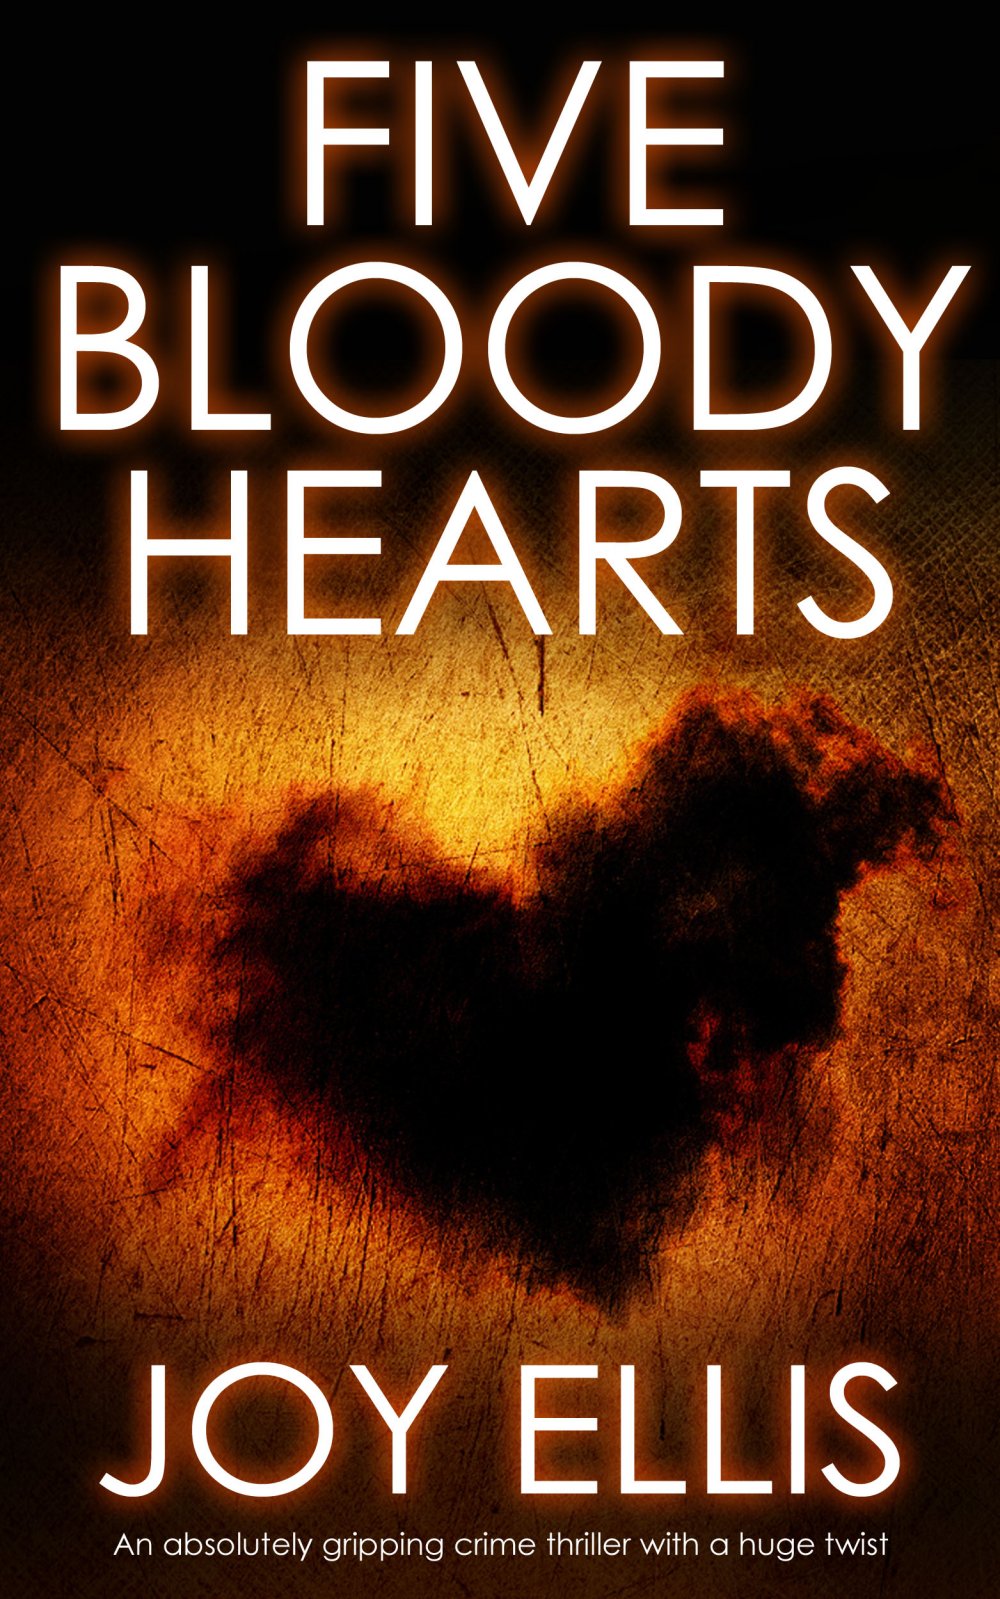 FIVE BLOODY HEARTS